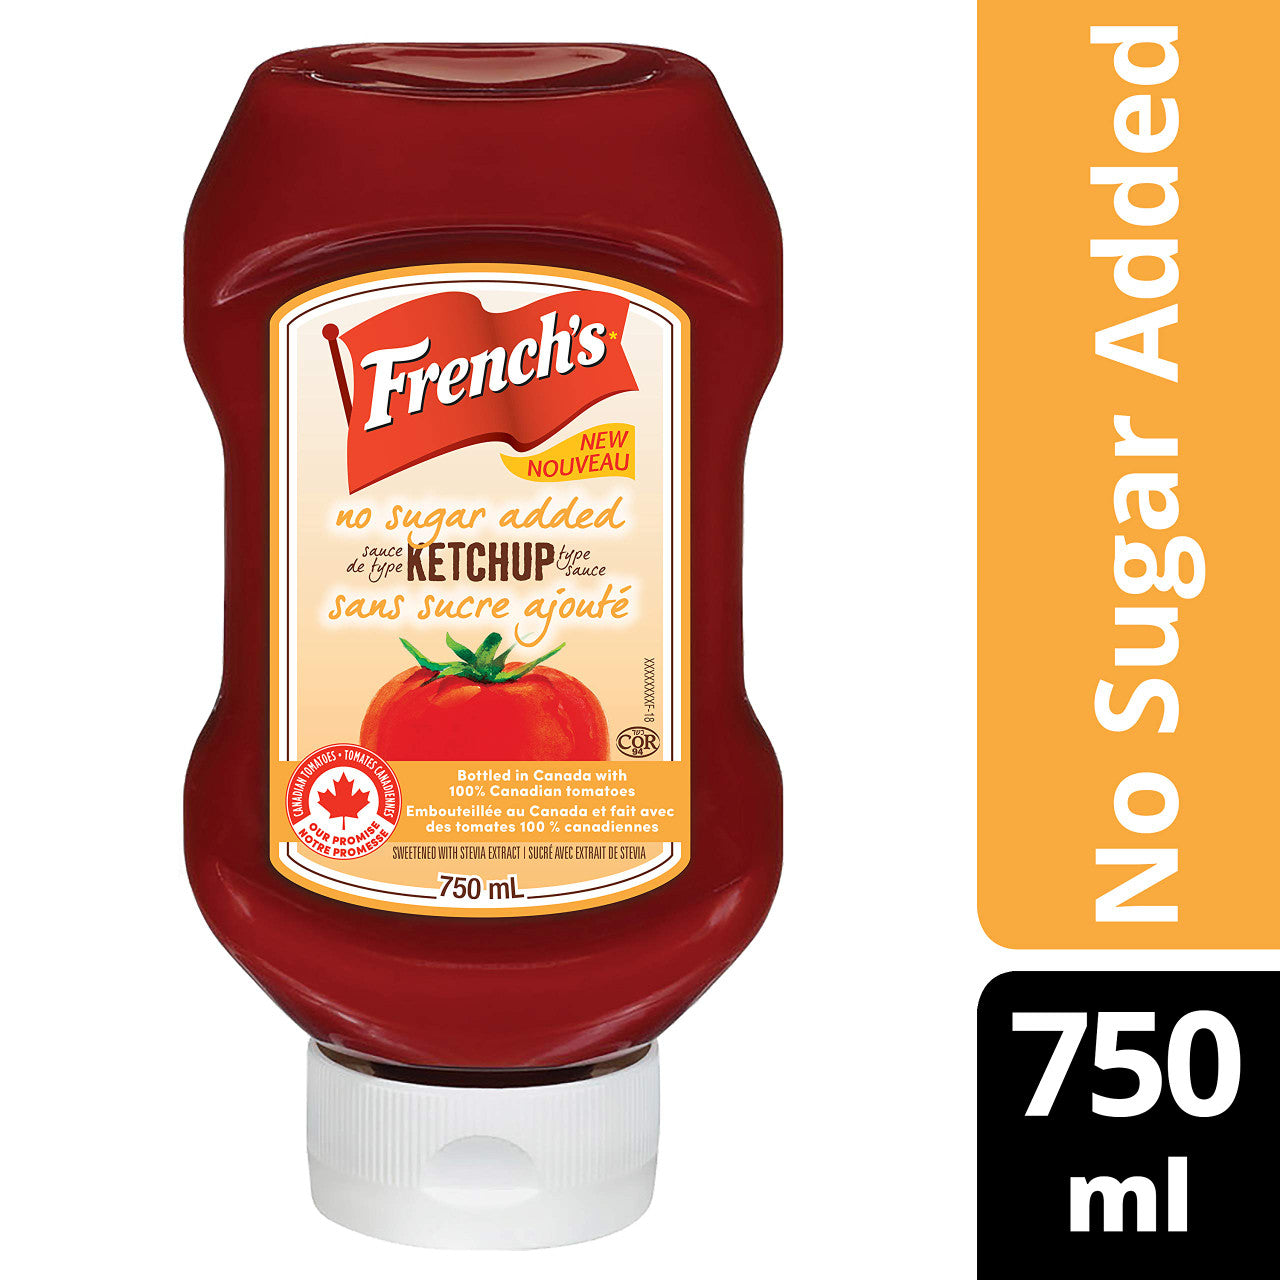 French's, Tomato Ketchup, No Sugar Added, 750ml/25.4oz. (Imported from Canada)